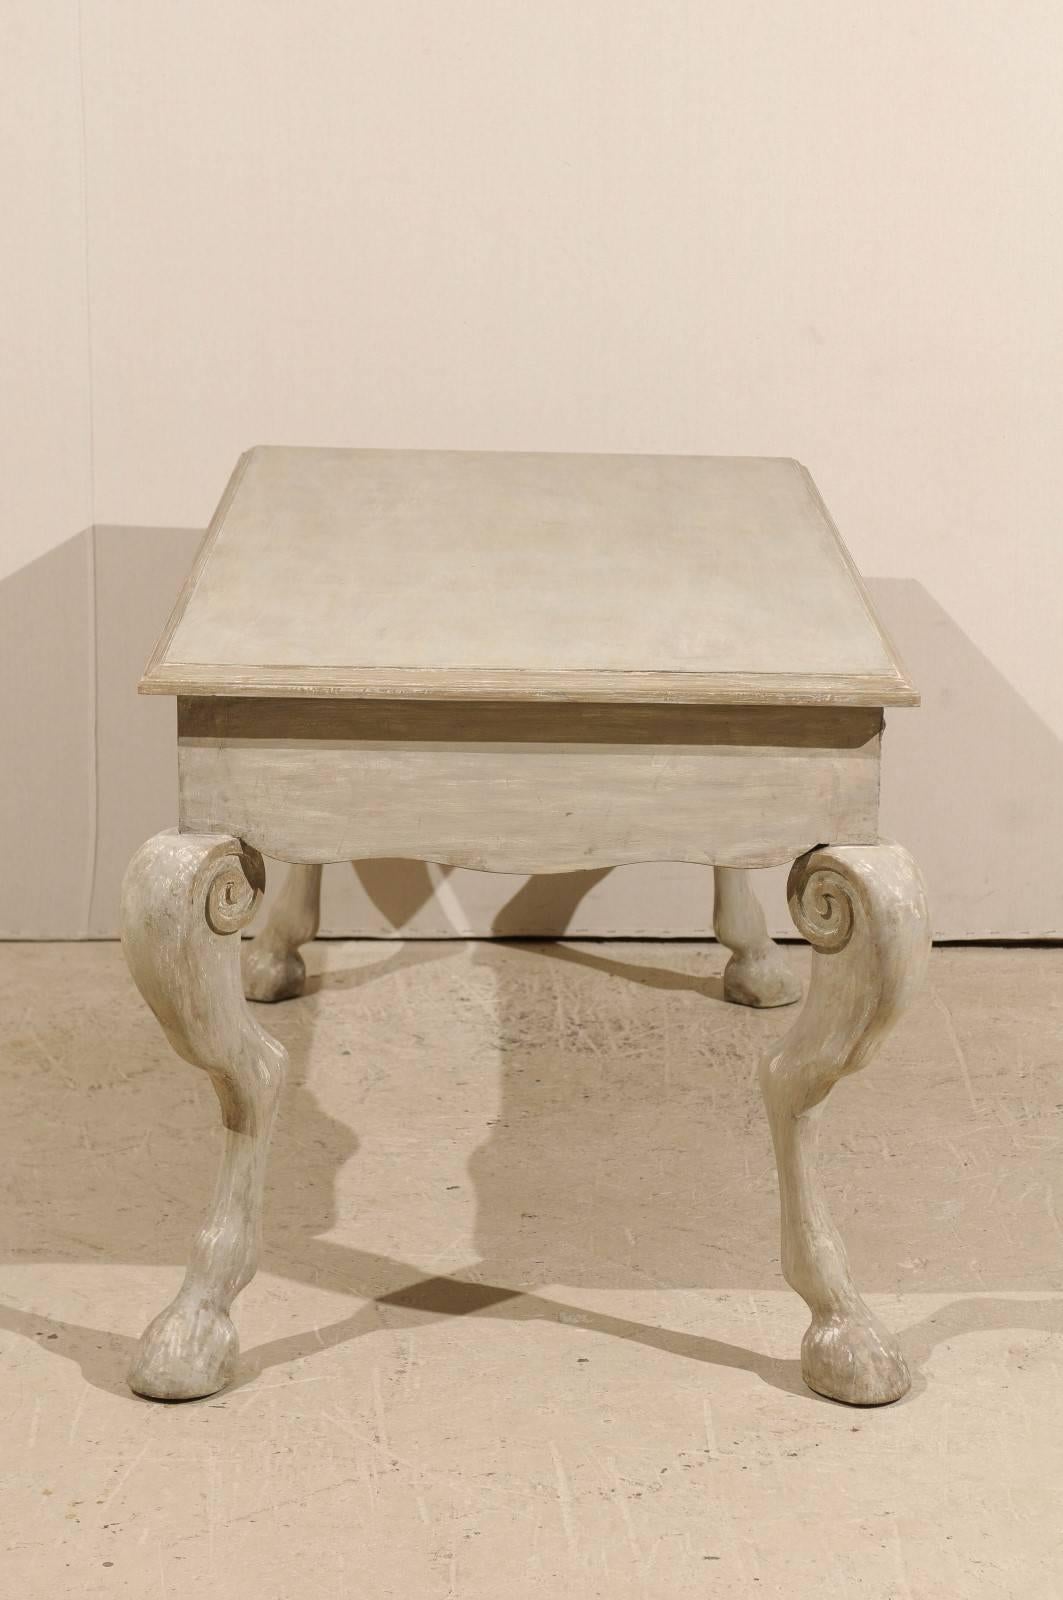 20th Century Unique Painted Wood Desk with Animal Legs and Hooved Feet of Grey-Green Color